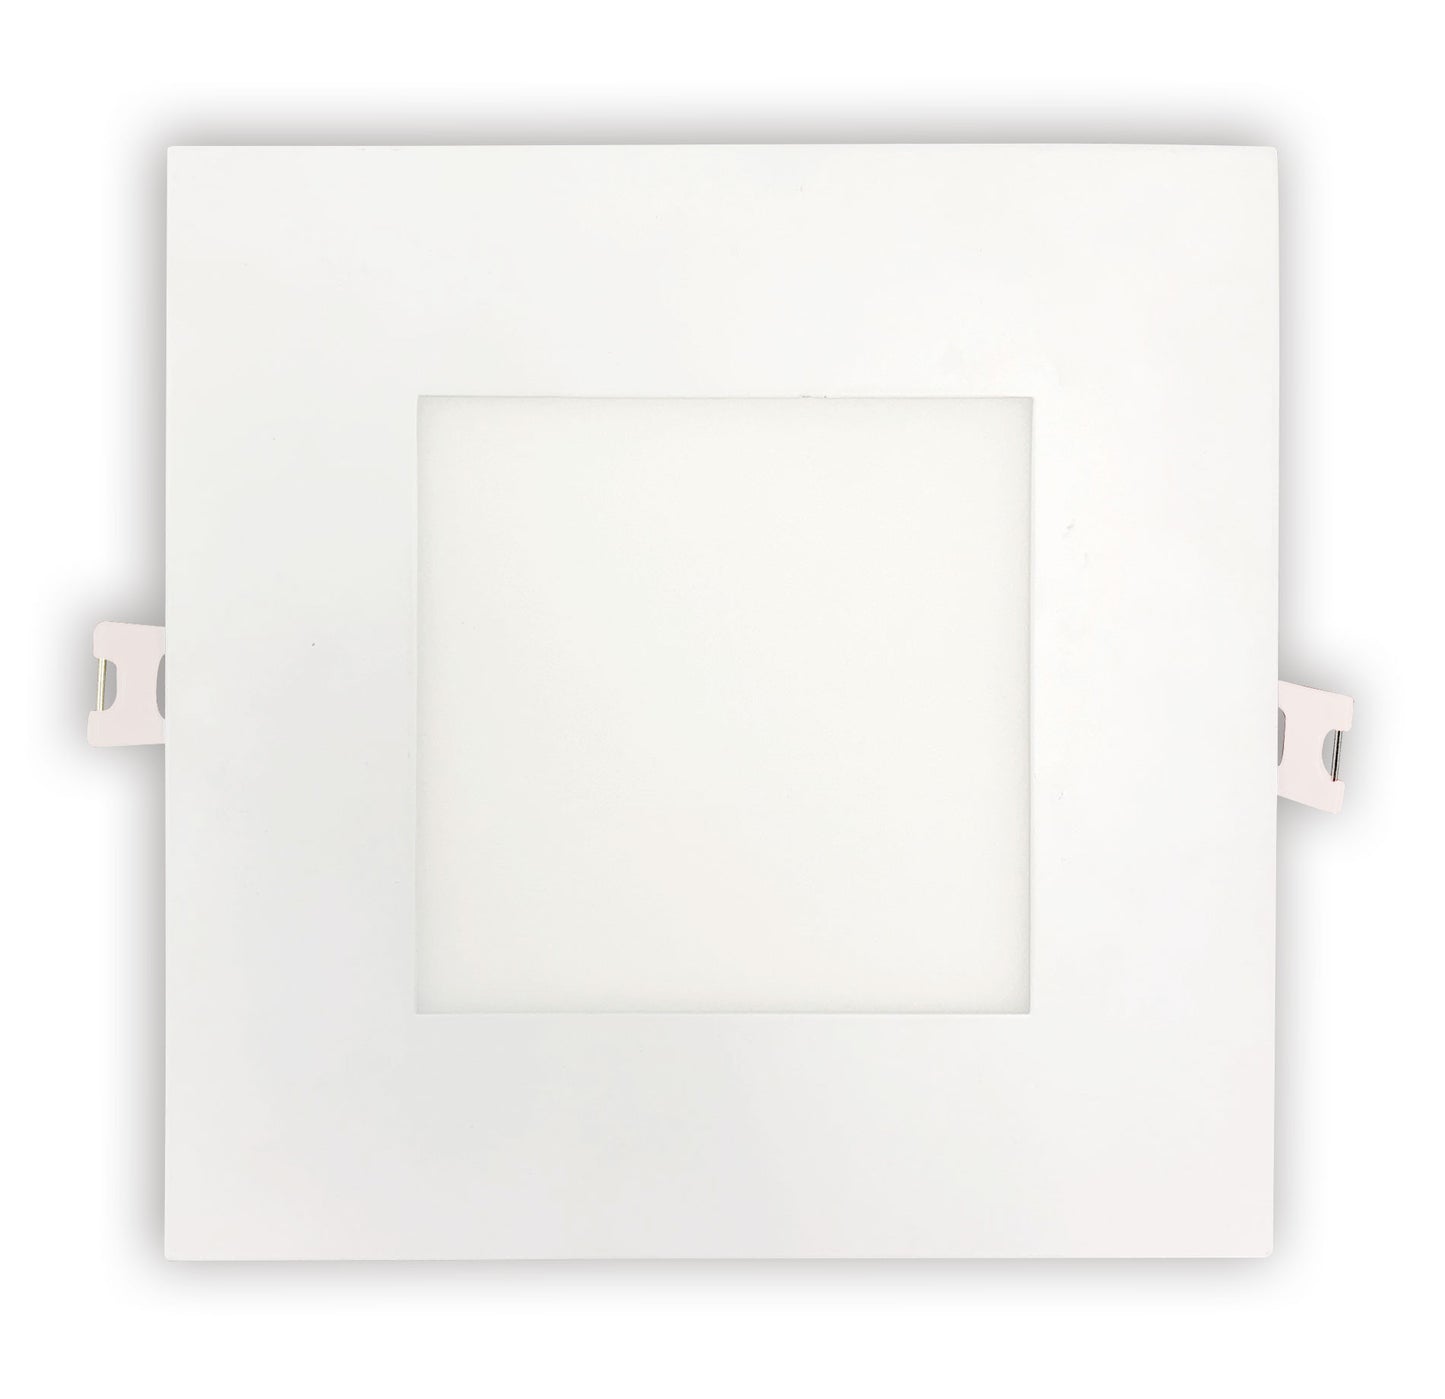 LR23764 6 Inch Ultra Thin Square LED Recessed Lighting, 5 Color Temperature Options 2700K - 5000K,